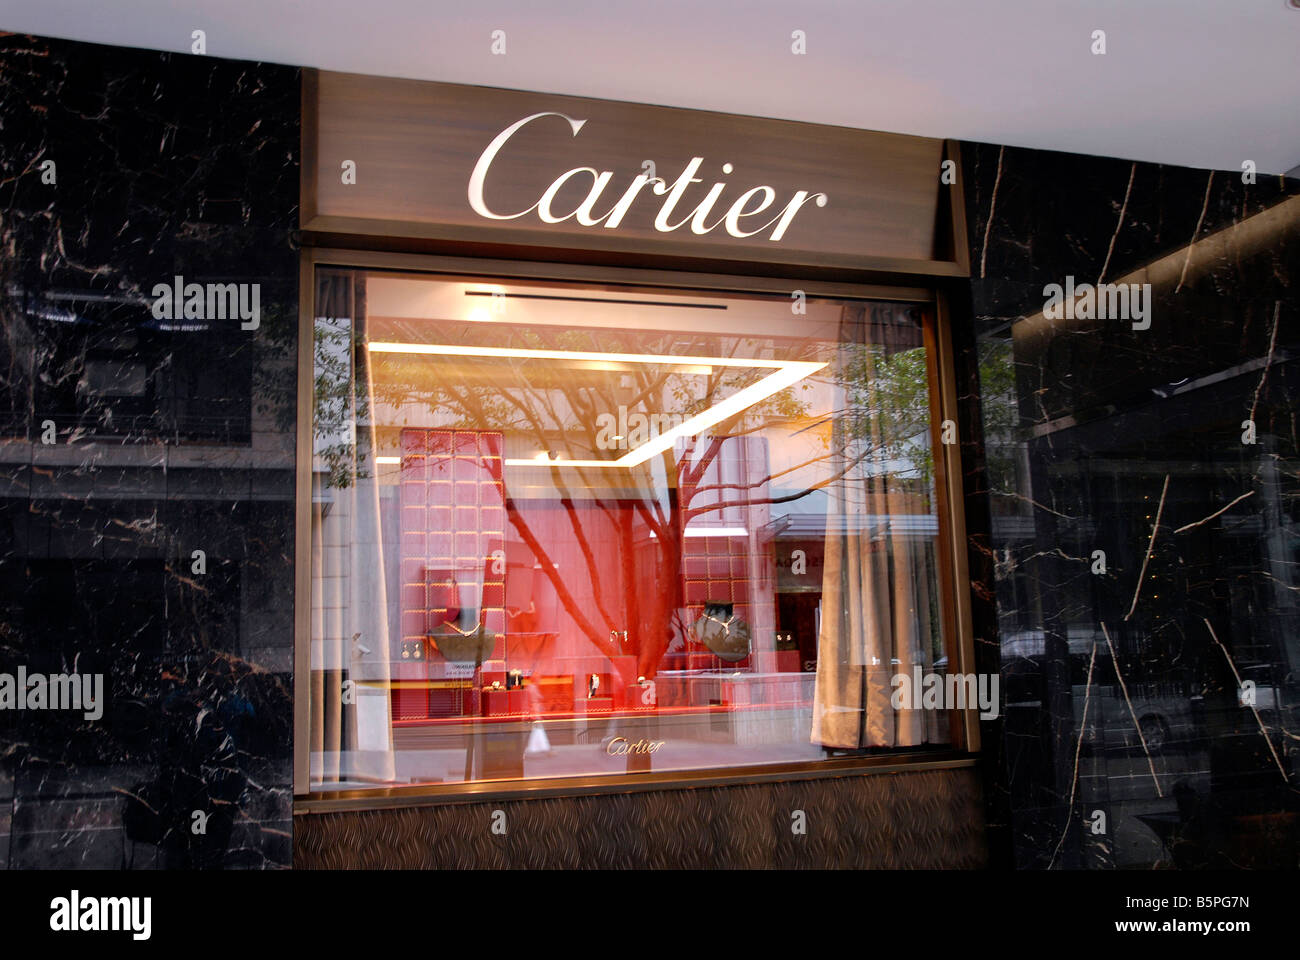 cartier trading hours sydney